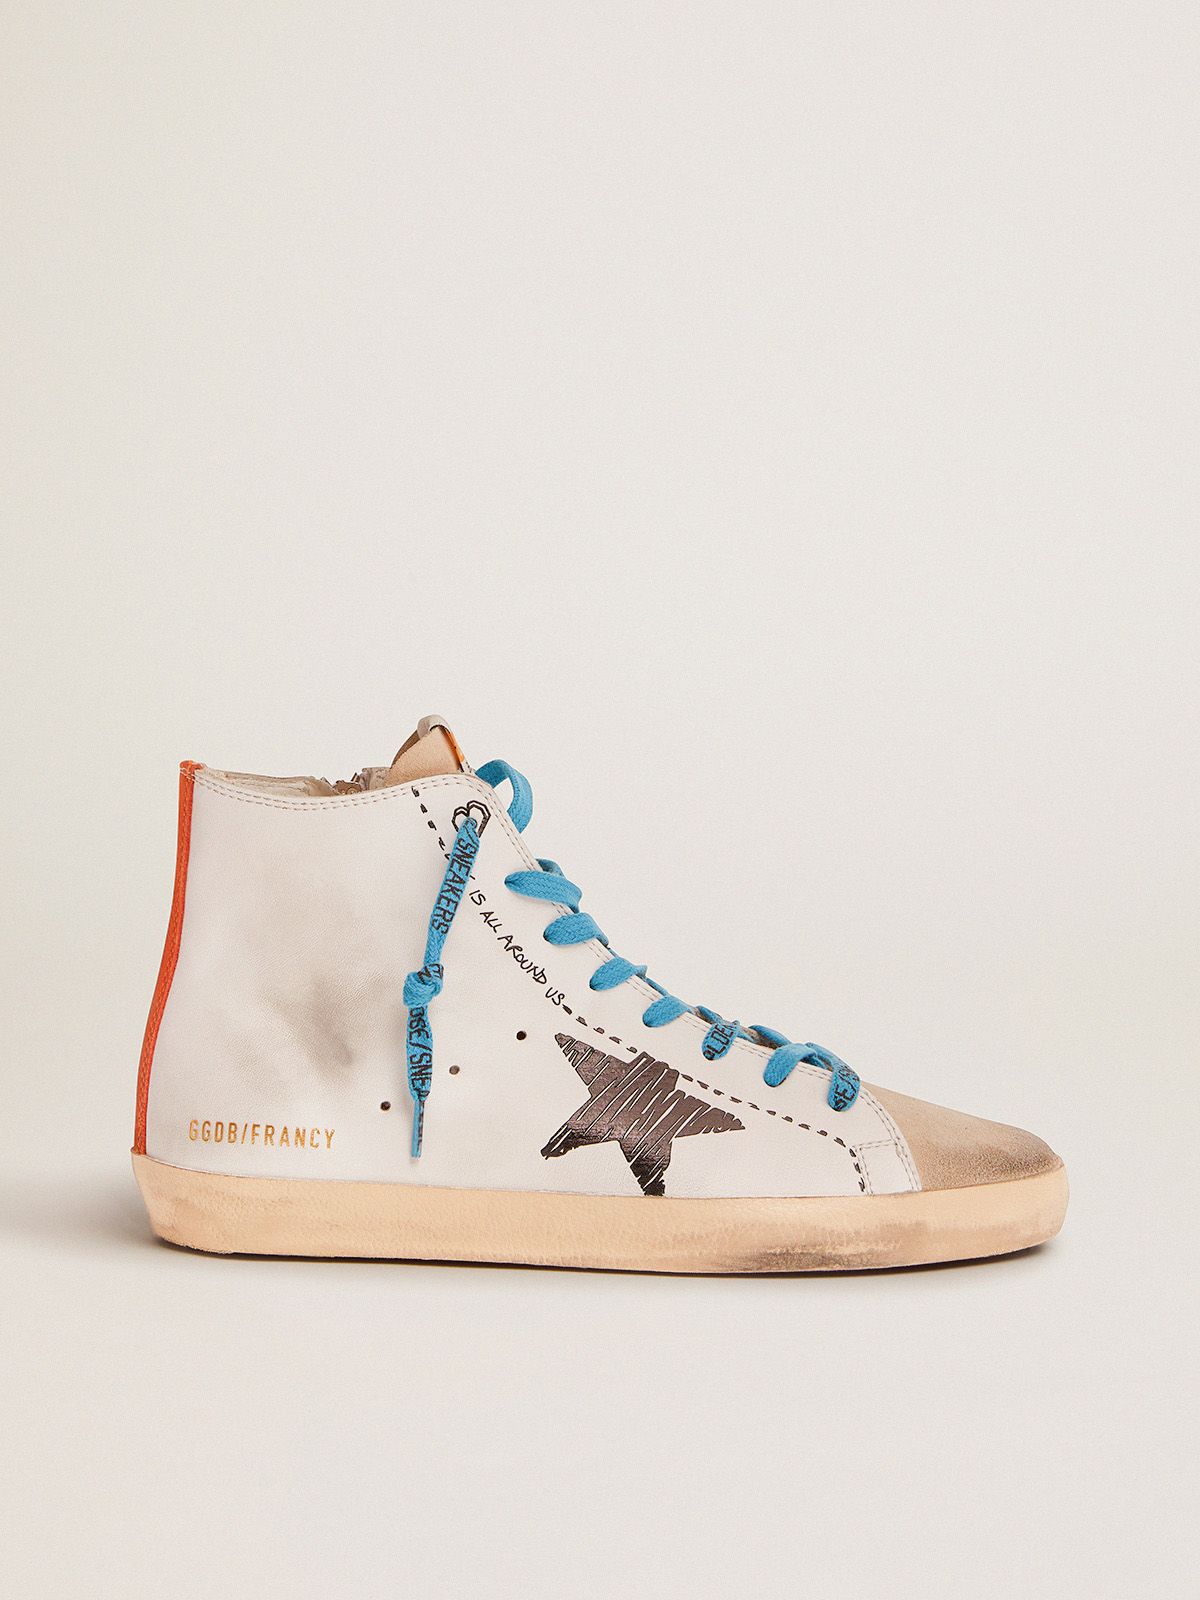 golden goose with nubuck tab star black Francy and heel leather sneakers printed